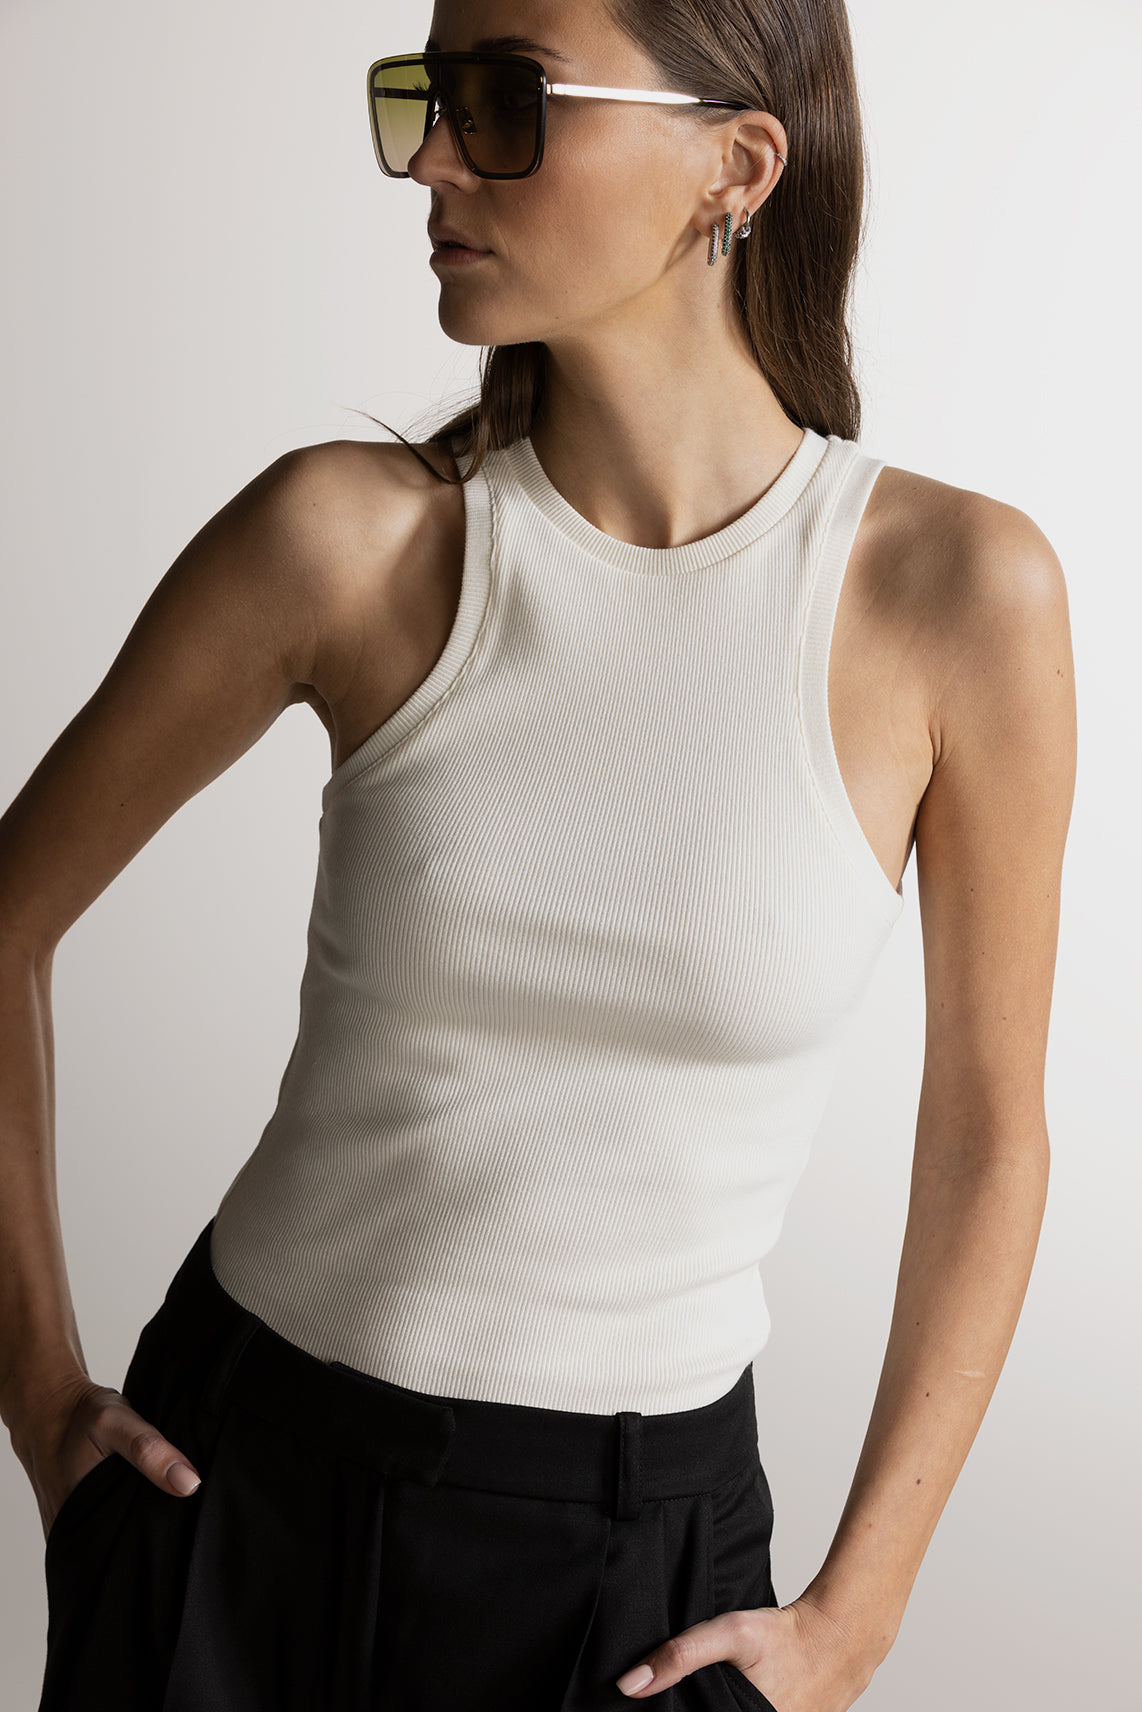 PIXIE WON'T PLAY LARA TANK TOP RIBBED ECRU WHITE ORGANIC COTTON SUSTAINABLE FASHION WEAR WITHOUT BRA LUXURY SLEEVELESS STYLISH COMFORTABLE BREATHABLE FABRIC VERSATILE RELAXED FIT SOFT TRENDY SUMMER AUTUMN WINTER SPRING WEAR CASUAL OUTFIT WORKOUT LAYERING VARIOUS COLORS FASHIONABLE MUST-HAVE 